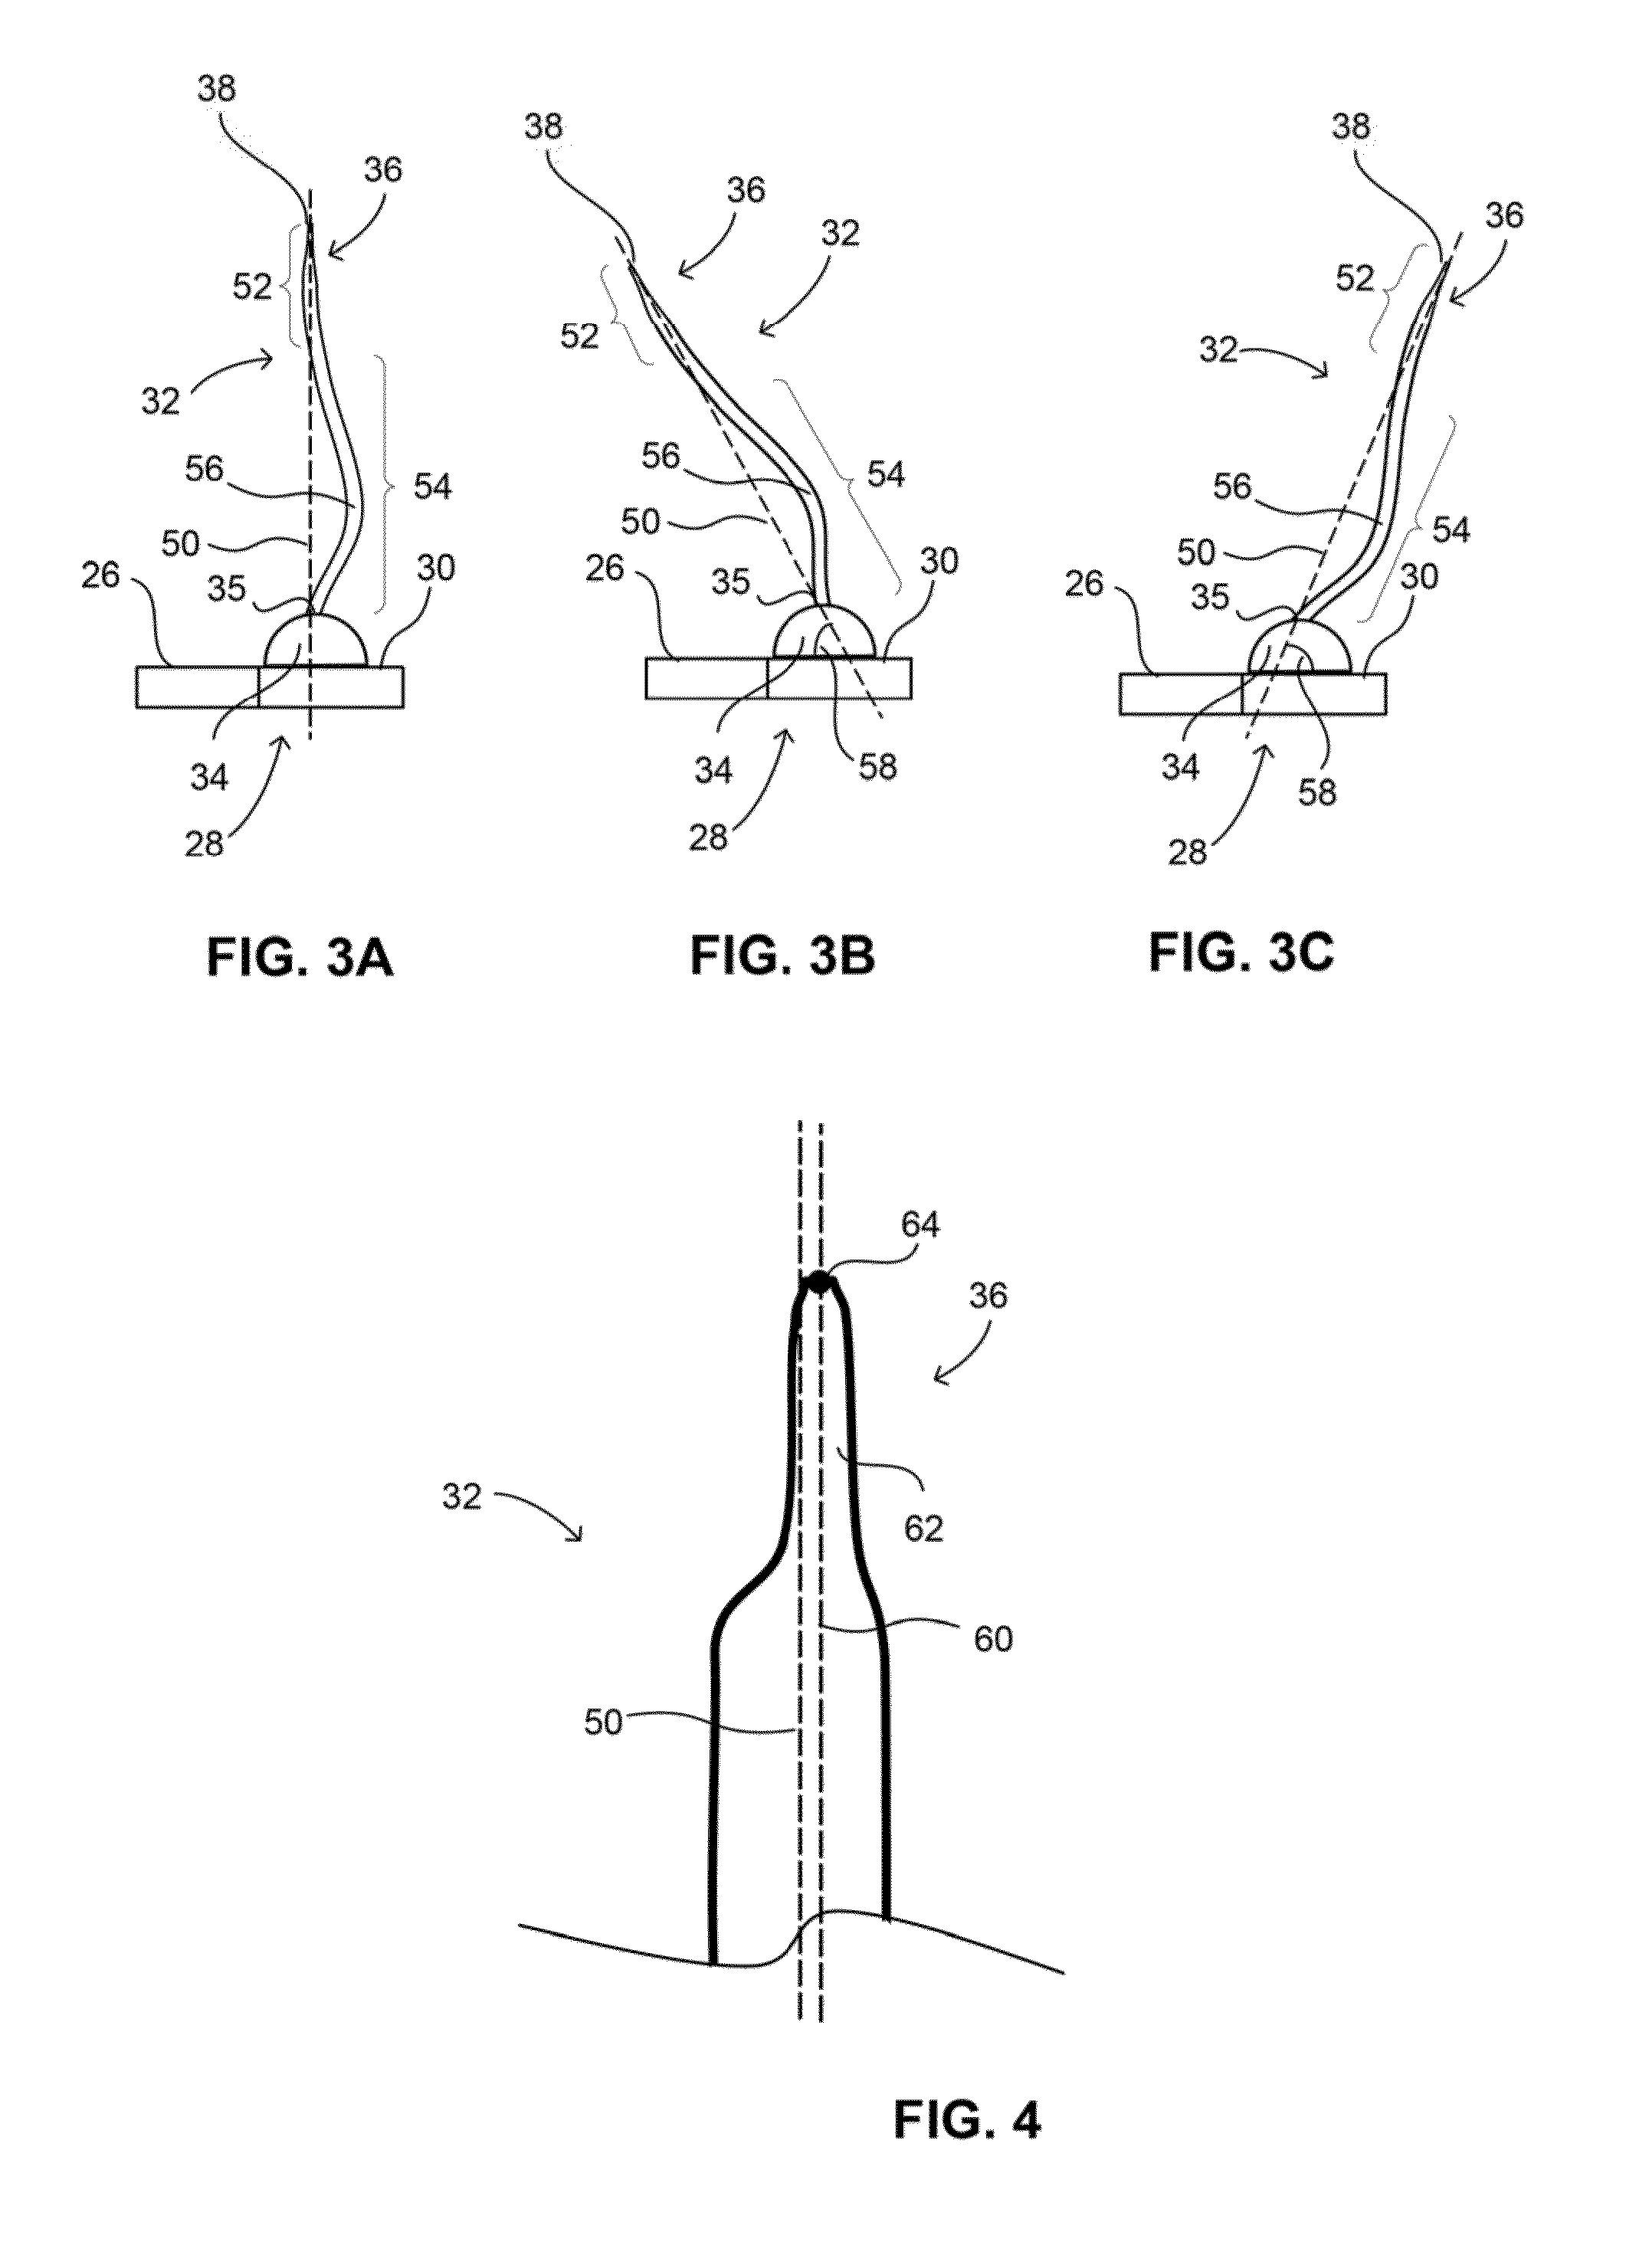 Microelectronic element with bond elements to encapsulation surface